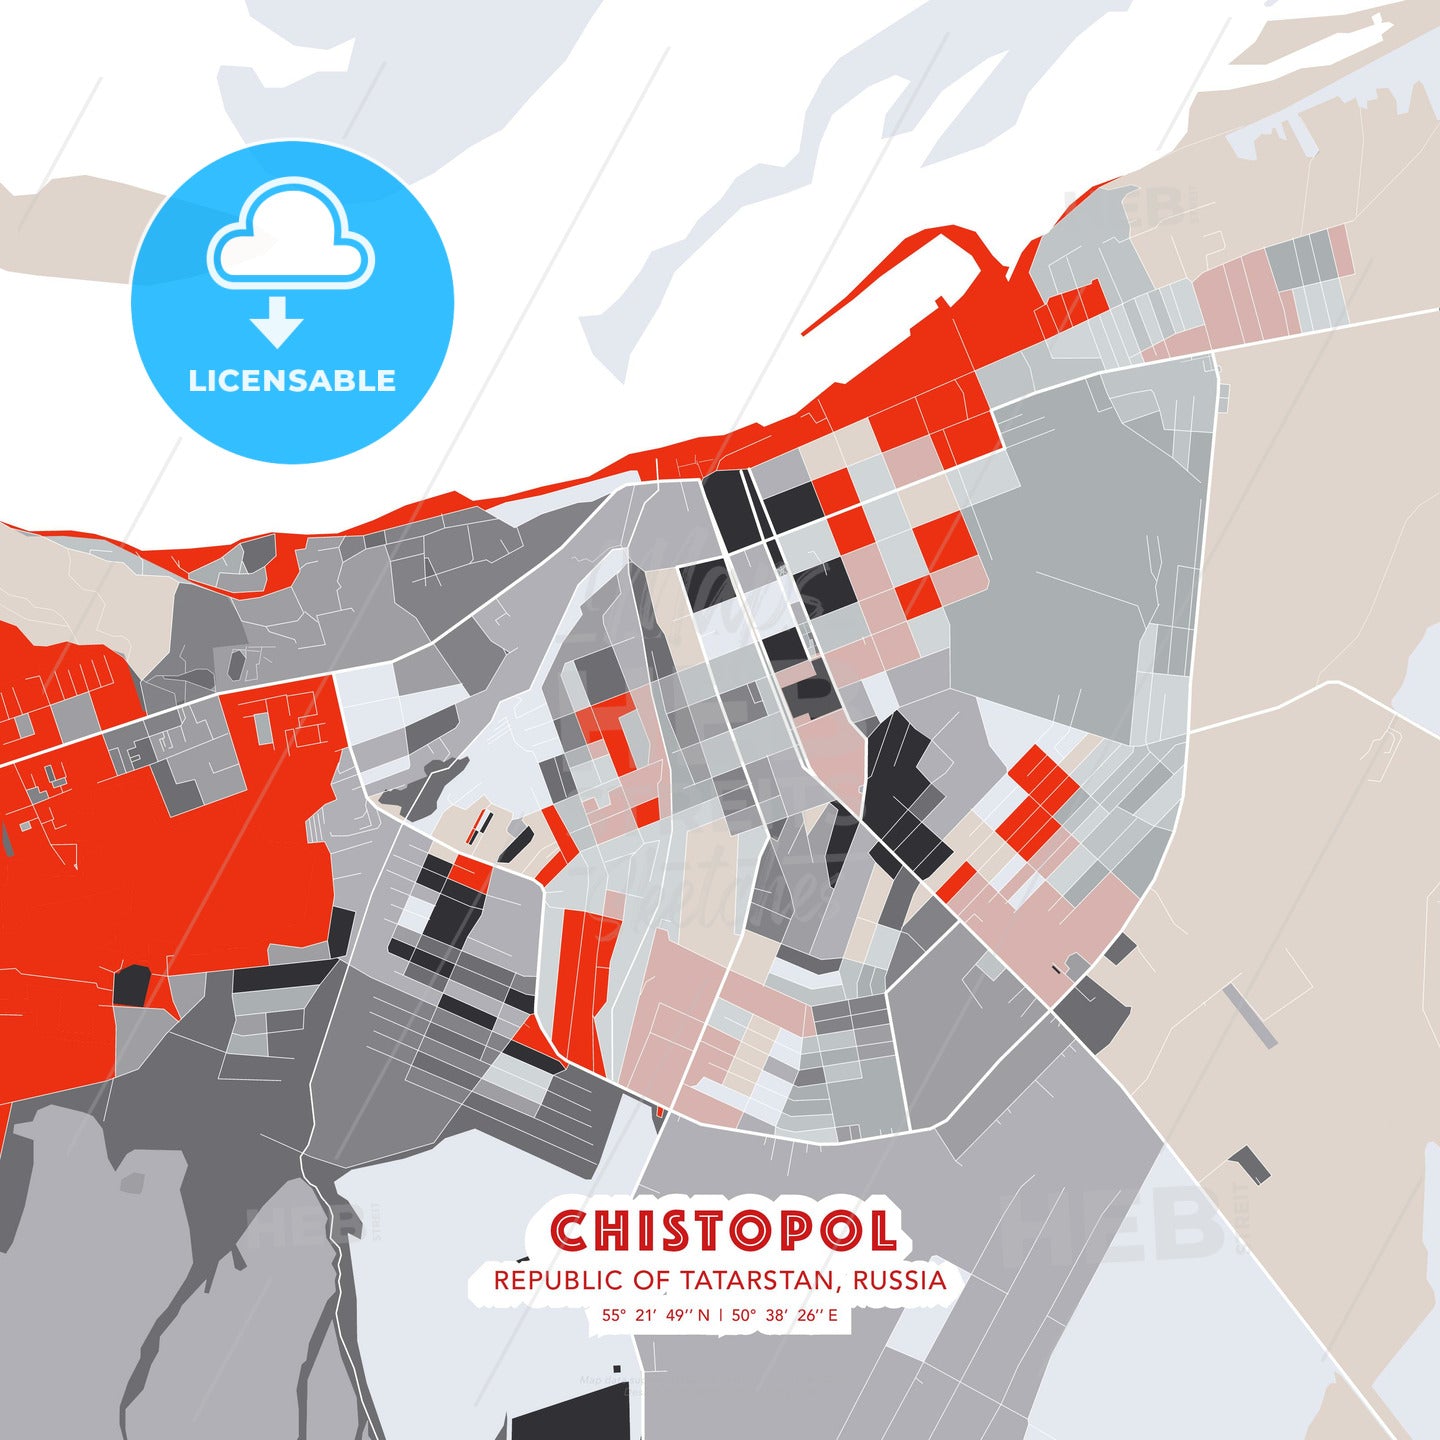 Chistopol, Republic of Tatarstan, Russia, modern map - HEBSTREITS Sketches